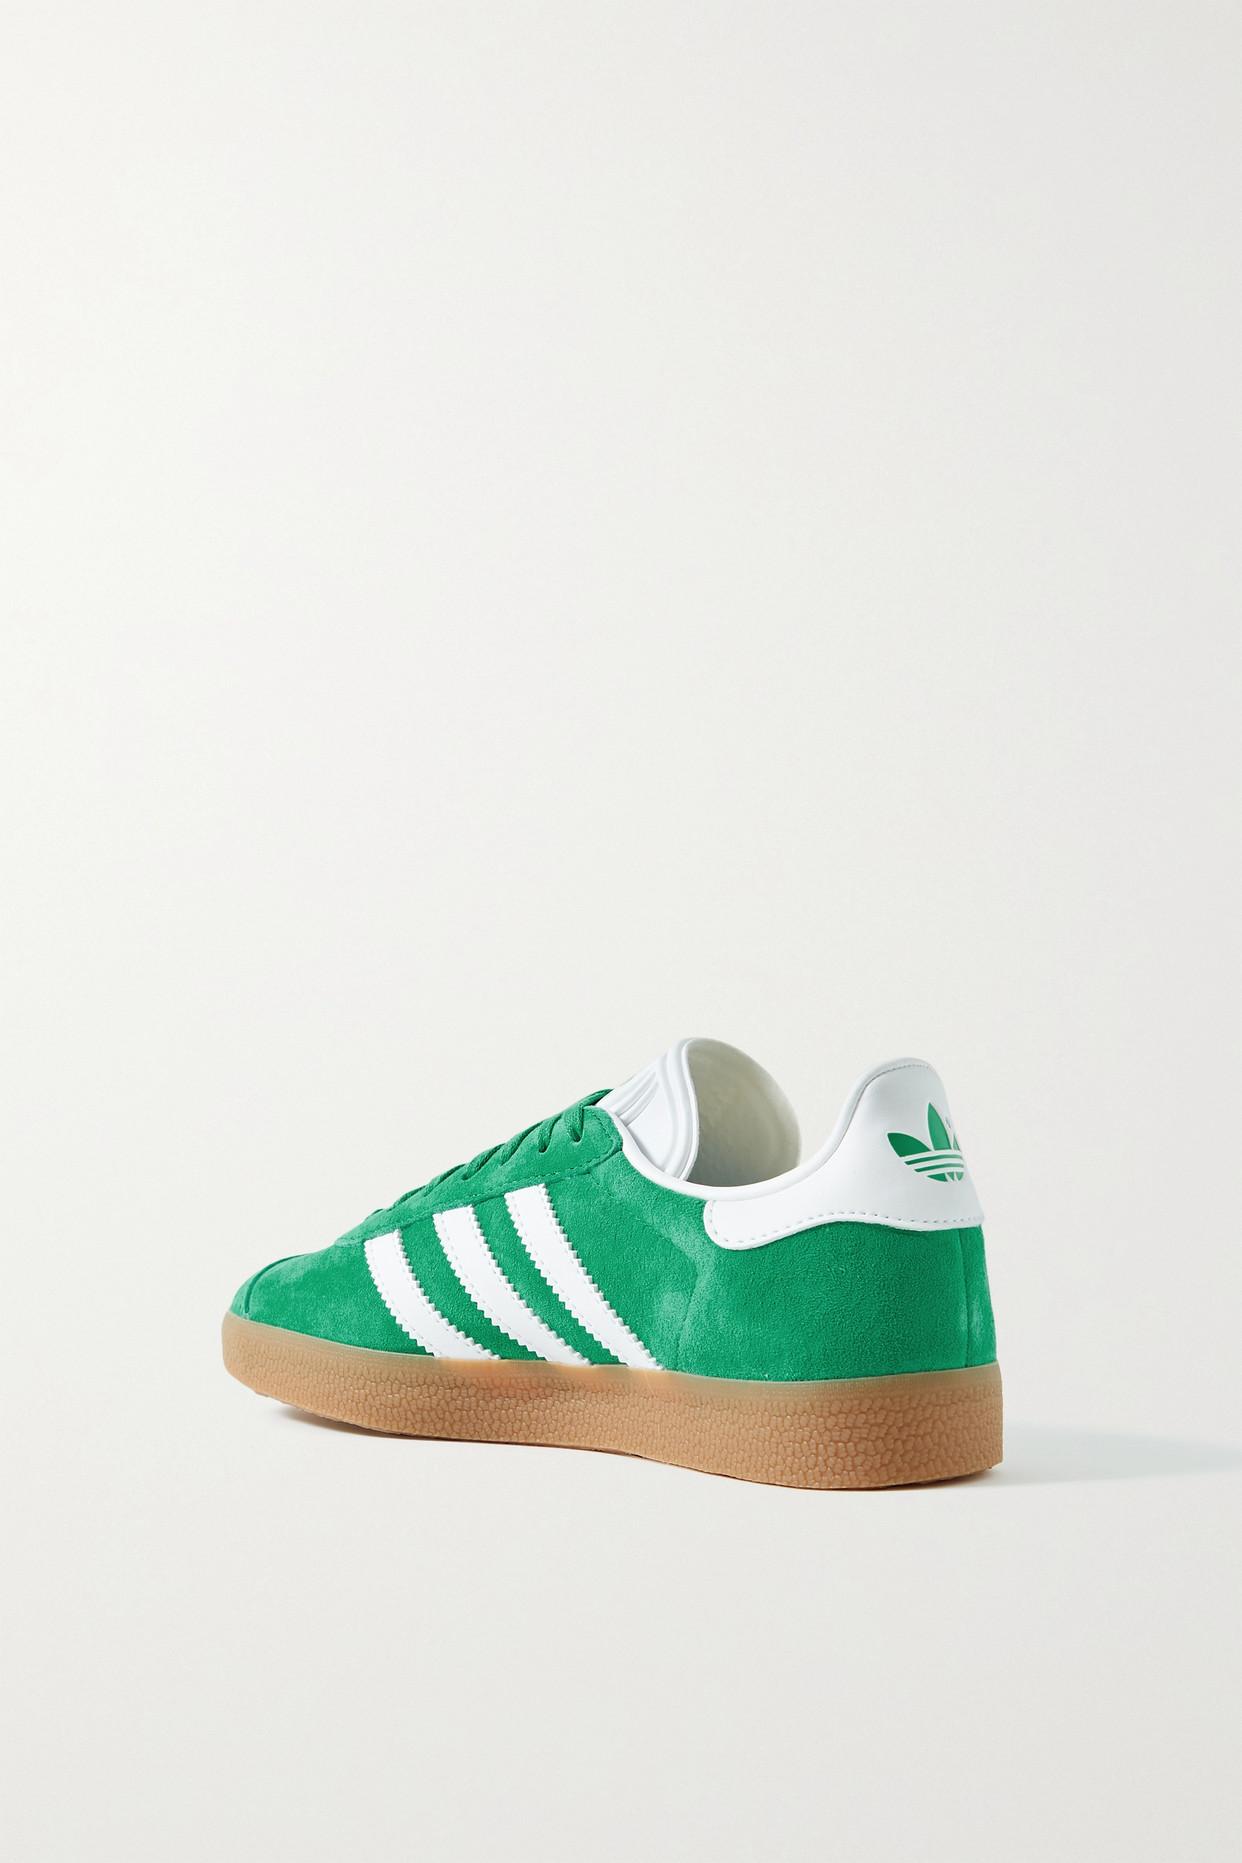 adidas Originals Gazelle Leather-trimmed Suede Sneakers in Green | Lyst